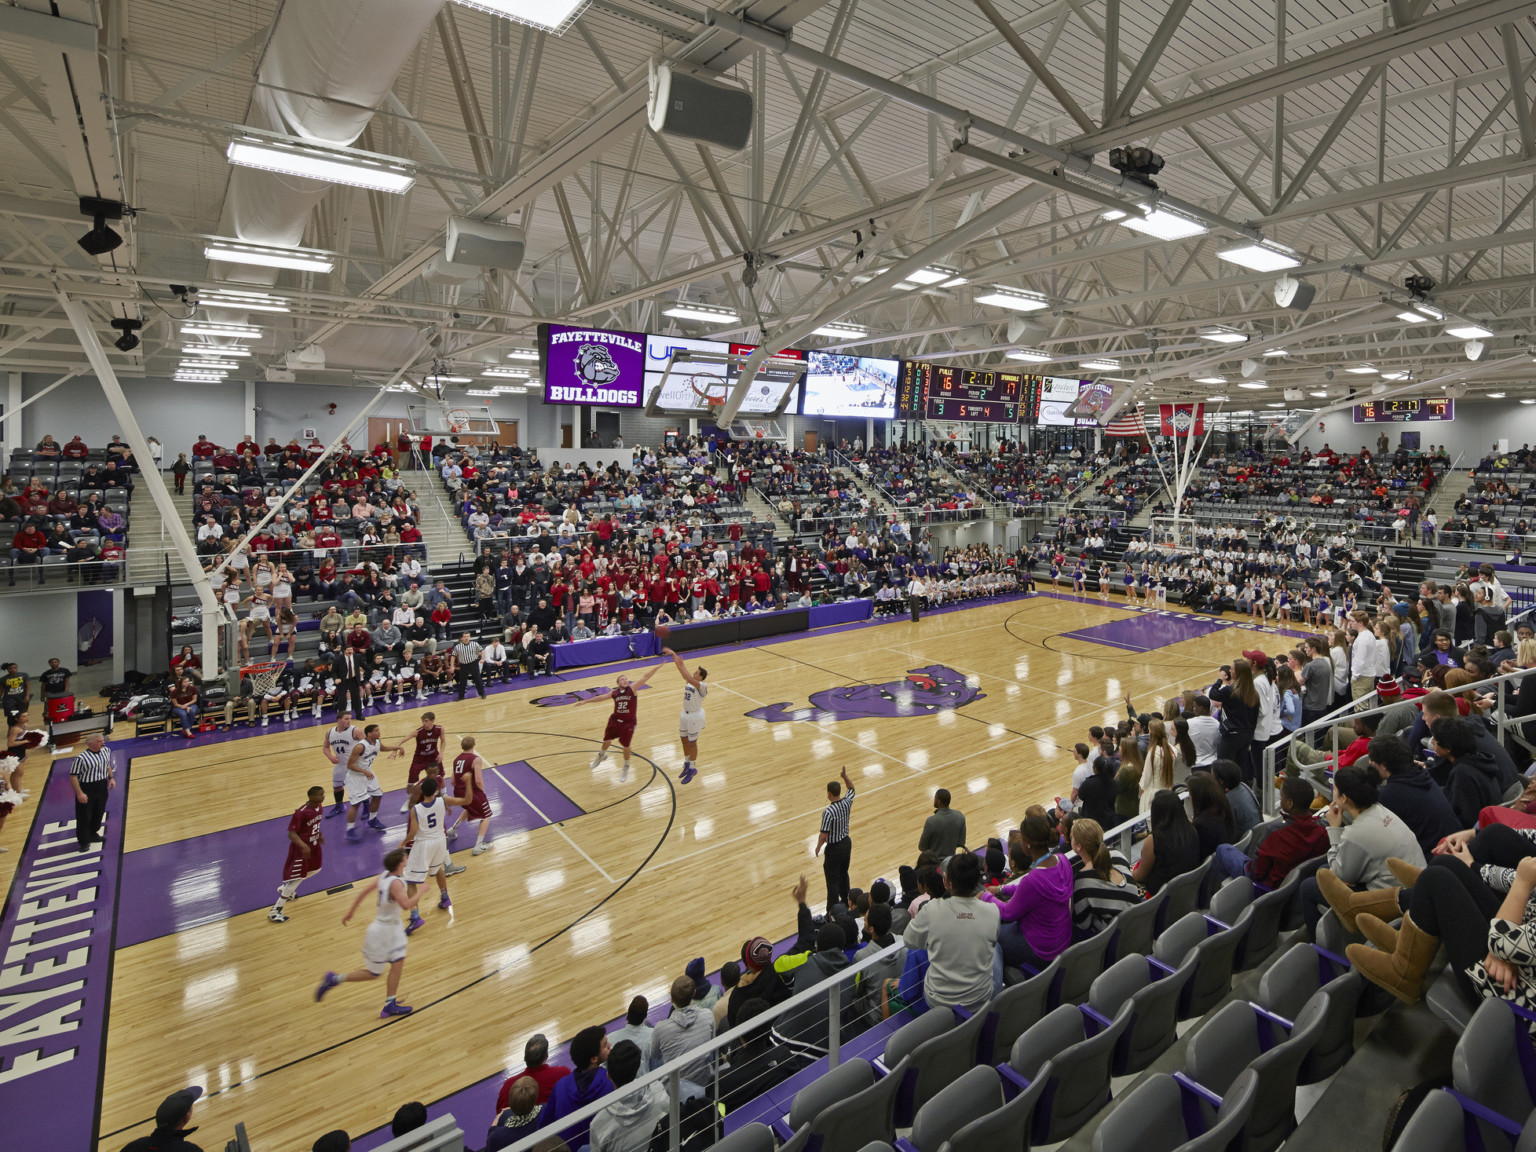 Double height gymnasium in use during a Fayetteville Bulldogs basketball game. Bleachers surround wood floor basketball court